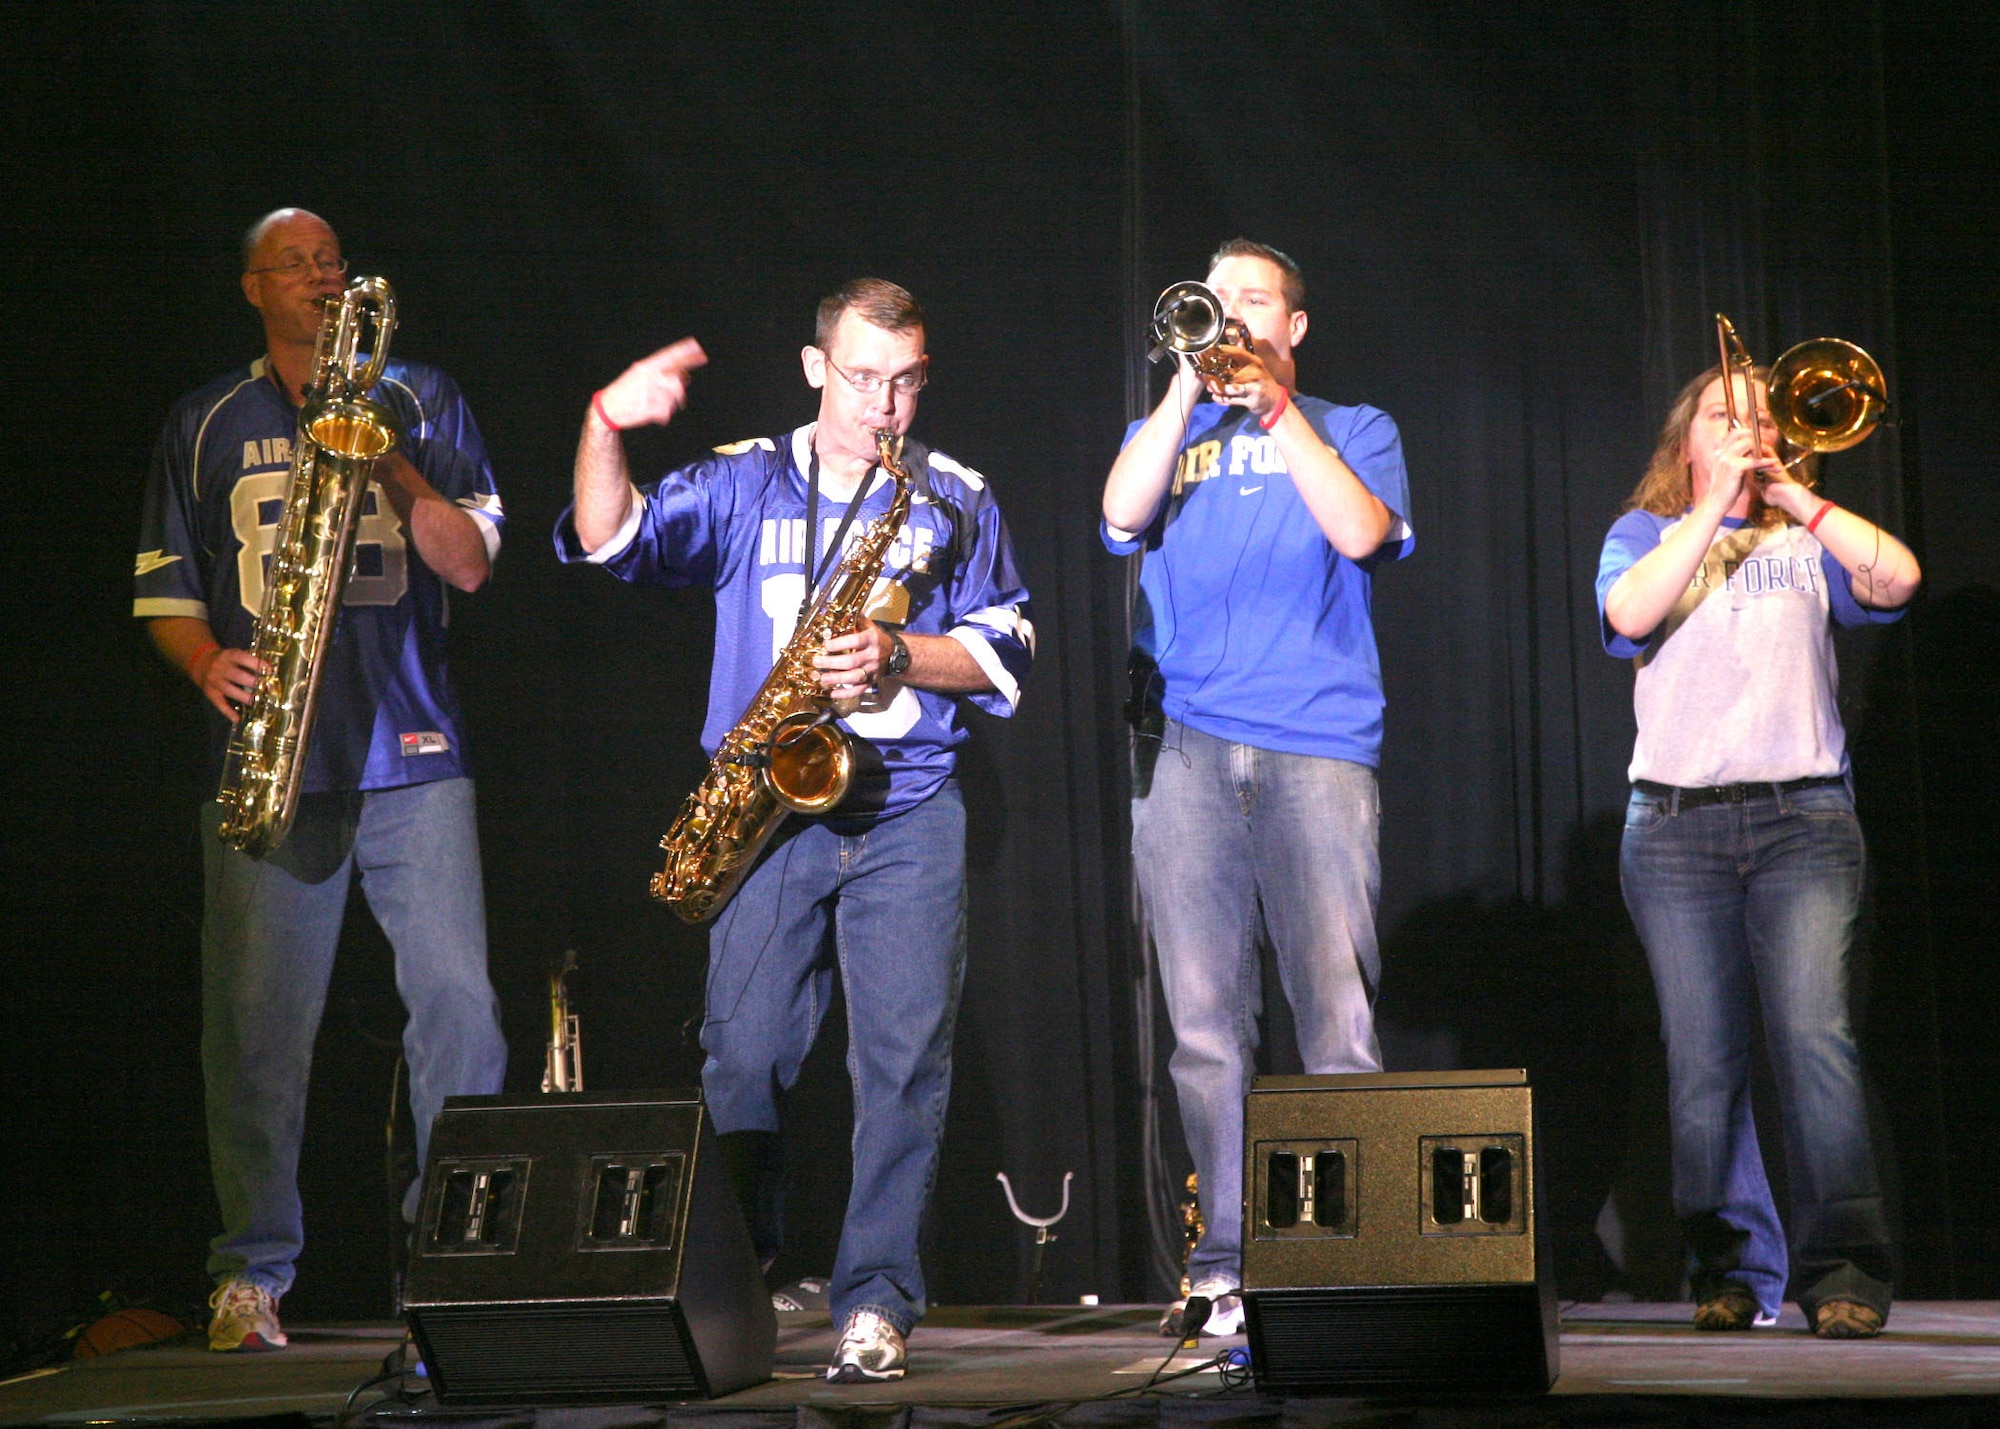 Warhawk, a popular music group from The Air Force Band of the West, performs for elementary and middle school students attending an anti-drug concert Oct. 14 at Trinity University in San Antonio. The concert was part of National Red Ribbon Week, an anti-drug campaign focused on educating youth about the dangers of drugs and encouraging them to make smart choices. Warhawk performed a variety of music, from Motown and classic rock to current pop music from artists like Miley Cyrus, the Black Eyed Peas and Taylor Swift. (U.S. Air Force photo/Robbin Cresswell)